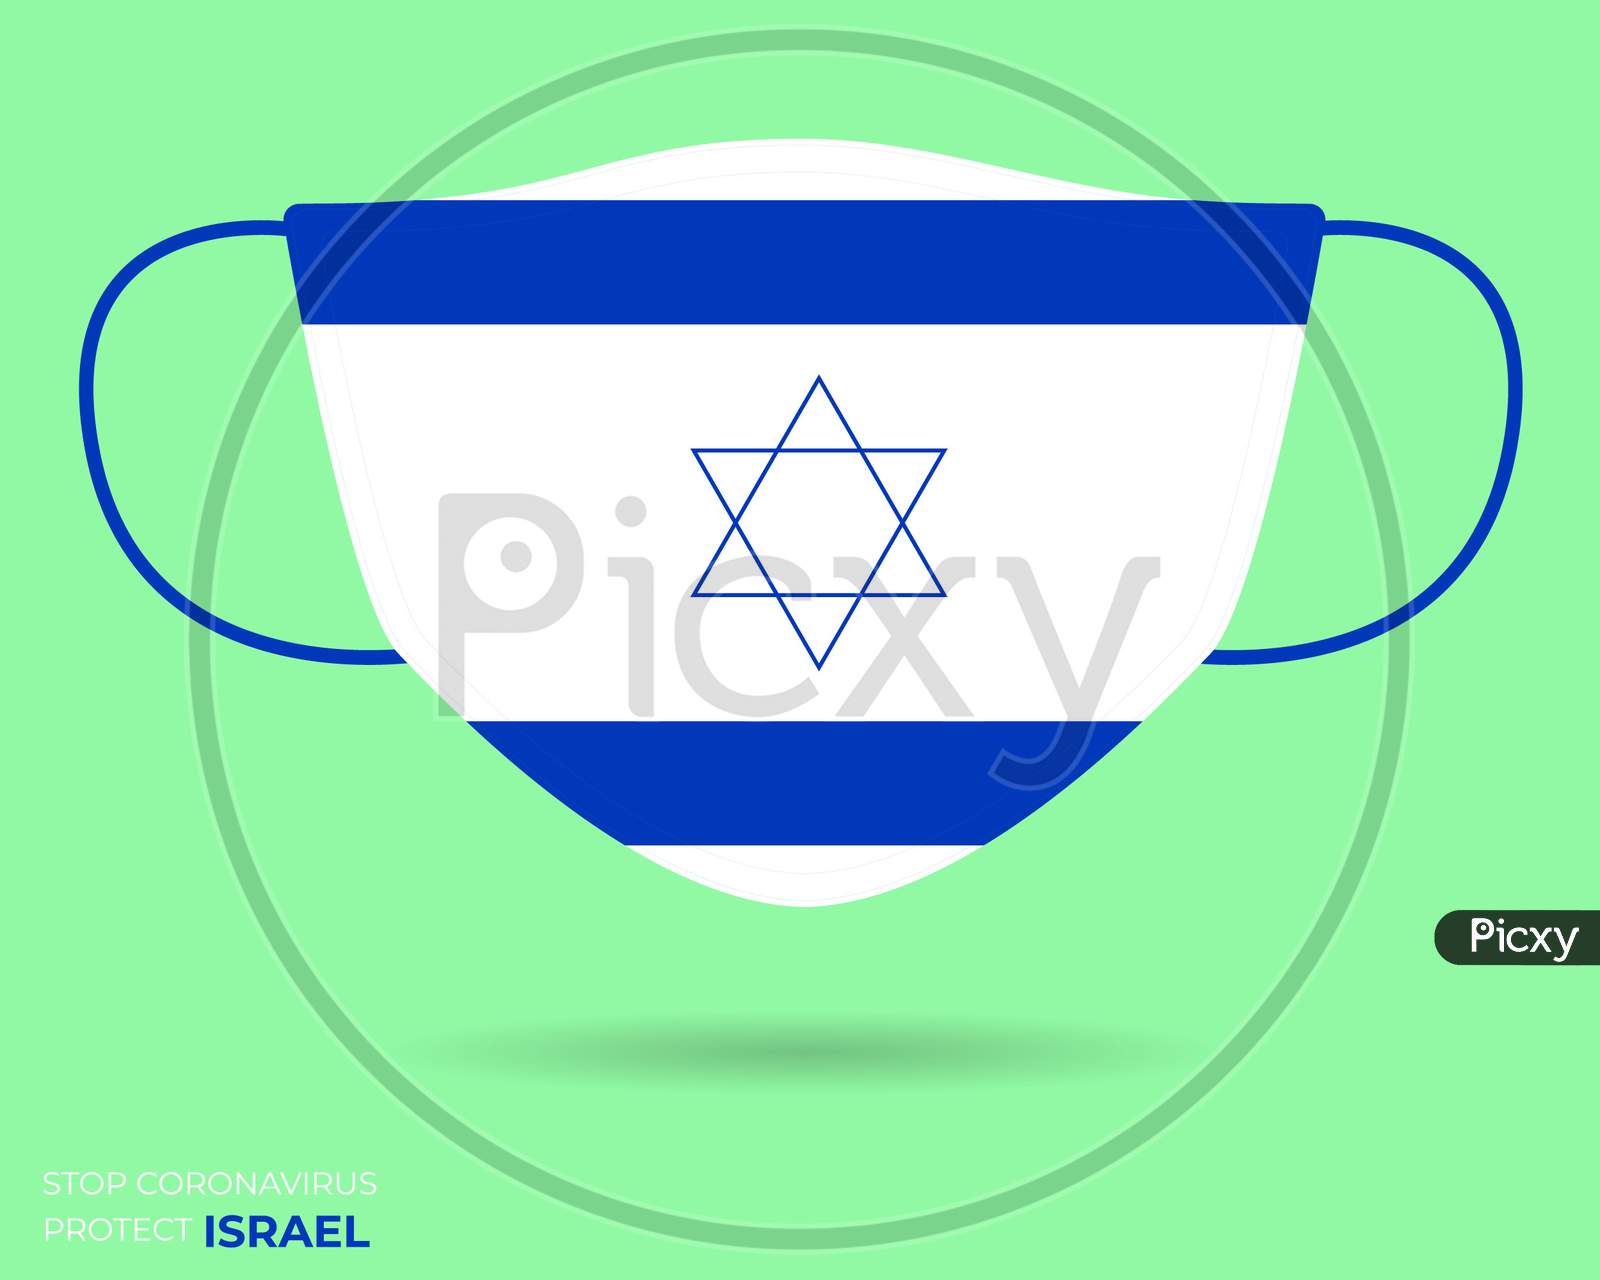 Coronavirus In Israel. Graphic Vector Of Surgical Mask With Israel Flag. (2019-Ncov Or Covid-19). Medical Face Mask As Concept Of Coronavirus Quarantine. Coronavirus Outbreak. Use For Printing Eps File